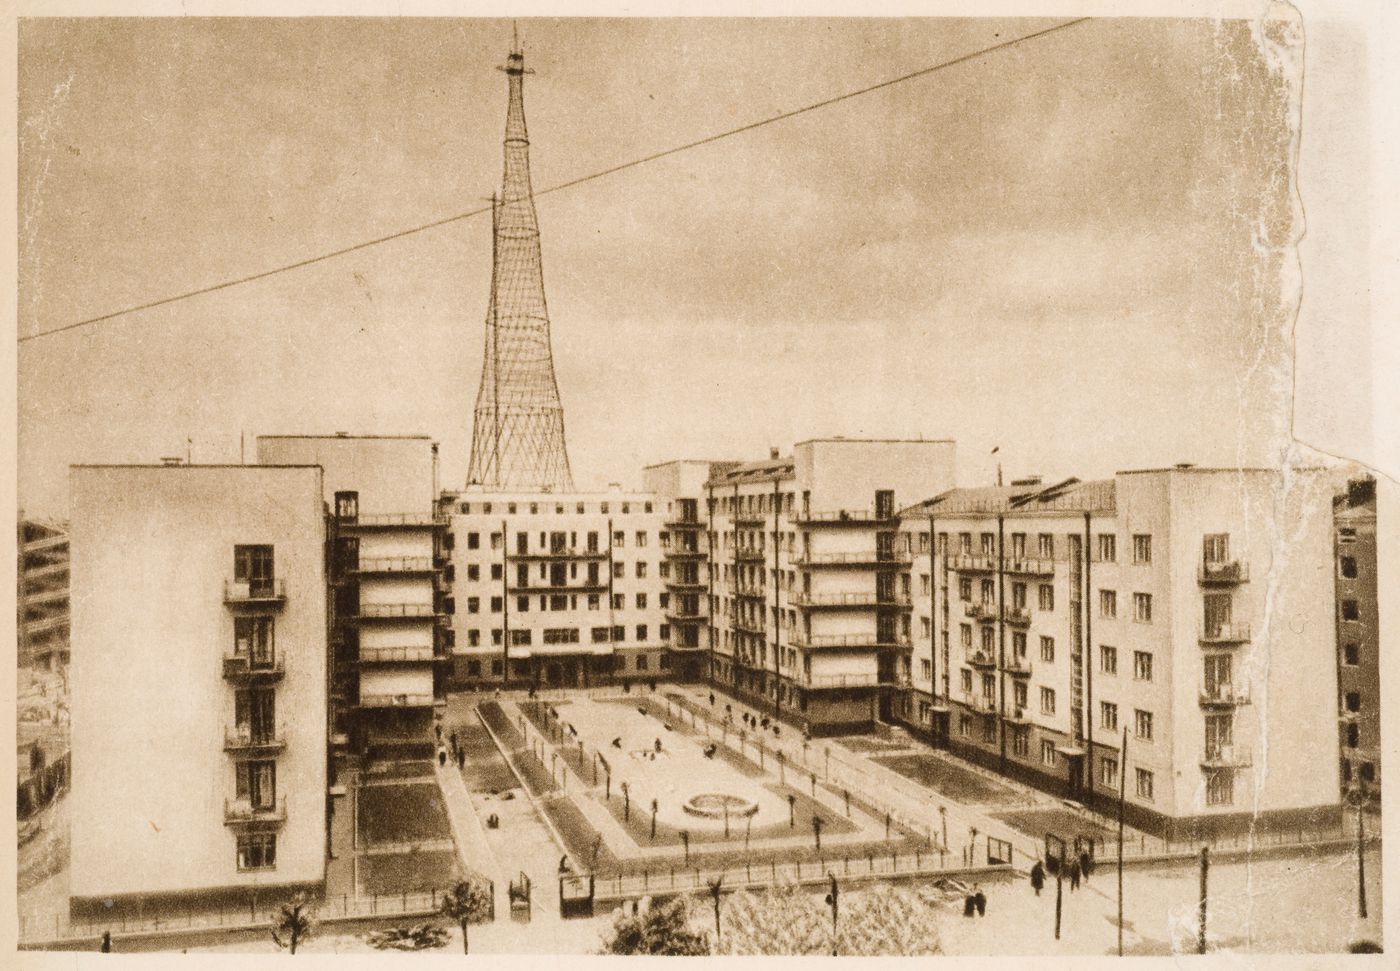 Exterior view of the First House Commune and the Shabolovsky Broadcasting Station aerial tower from the magazine "USSR in Construction", Moscow